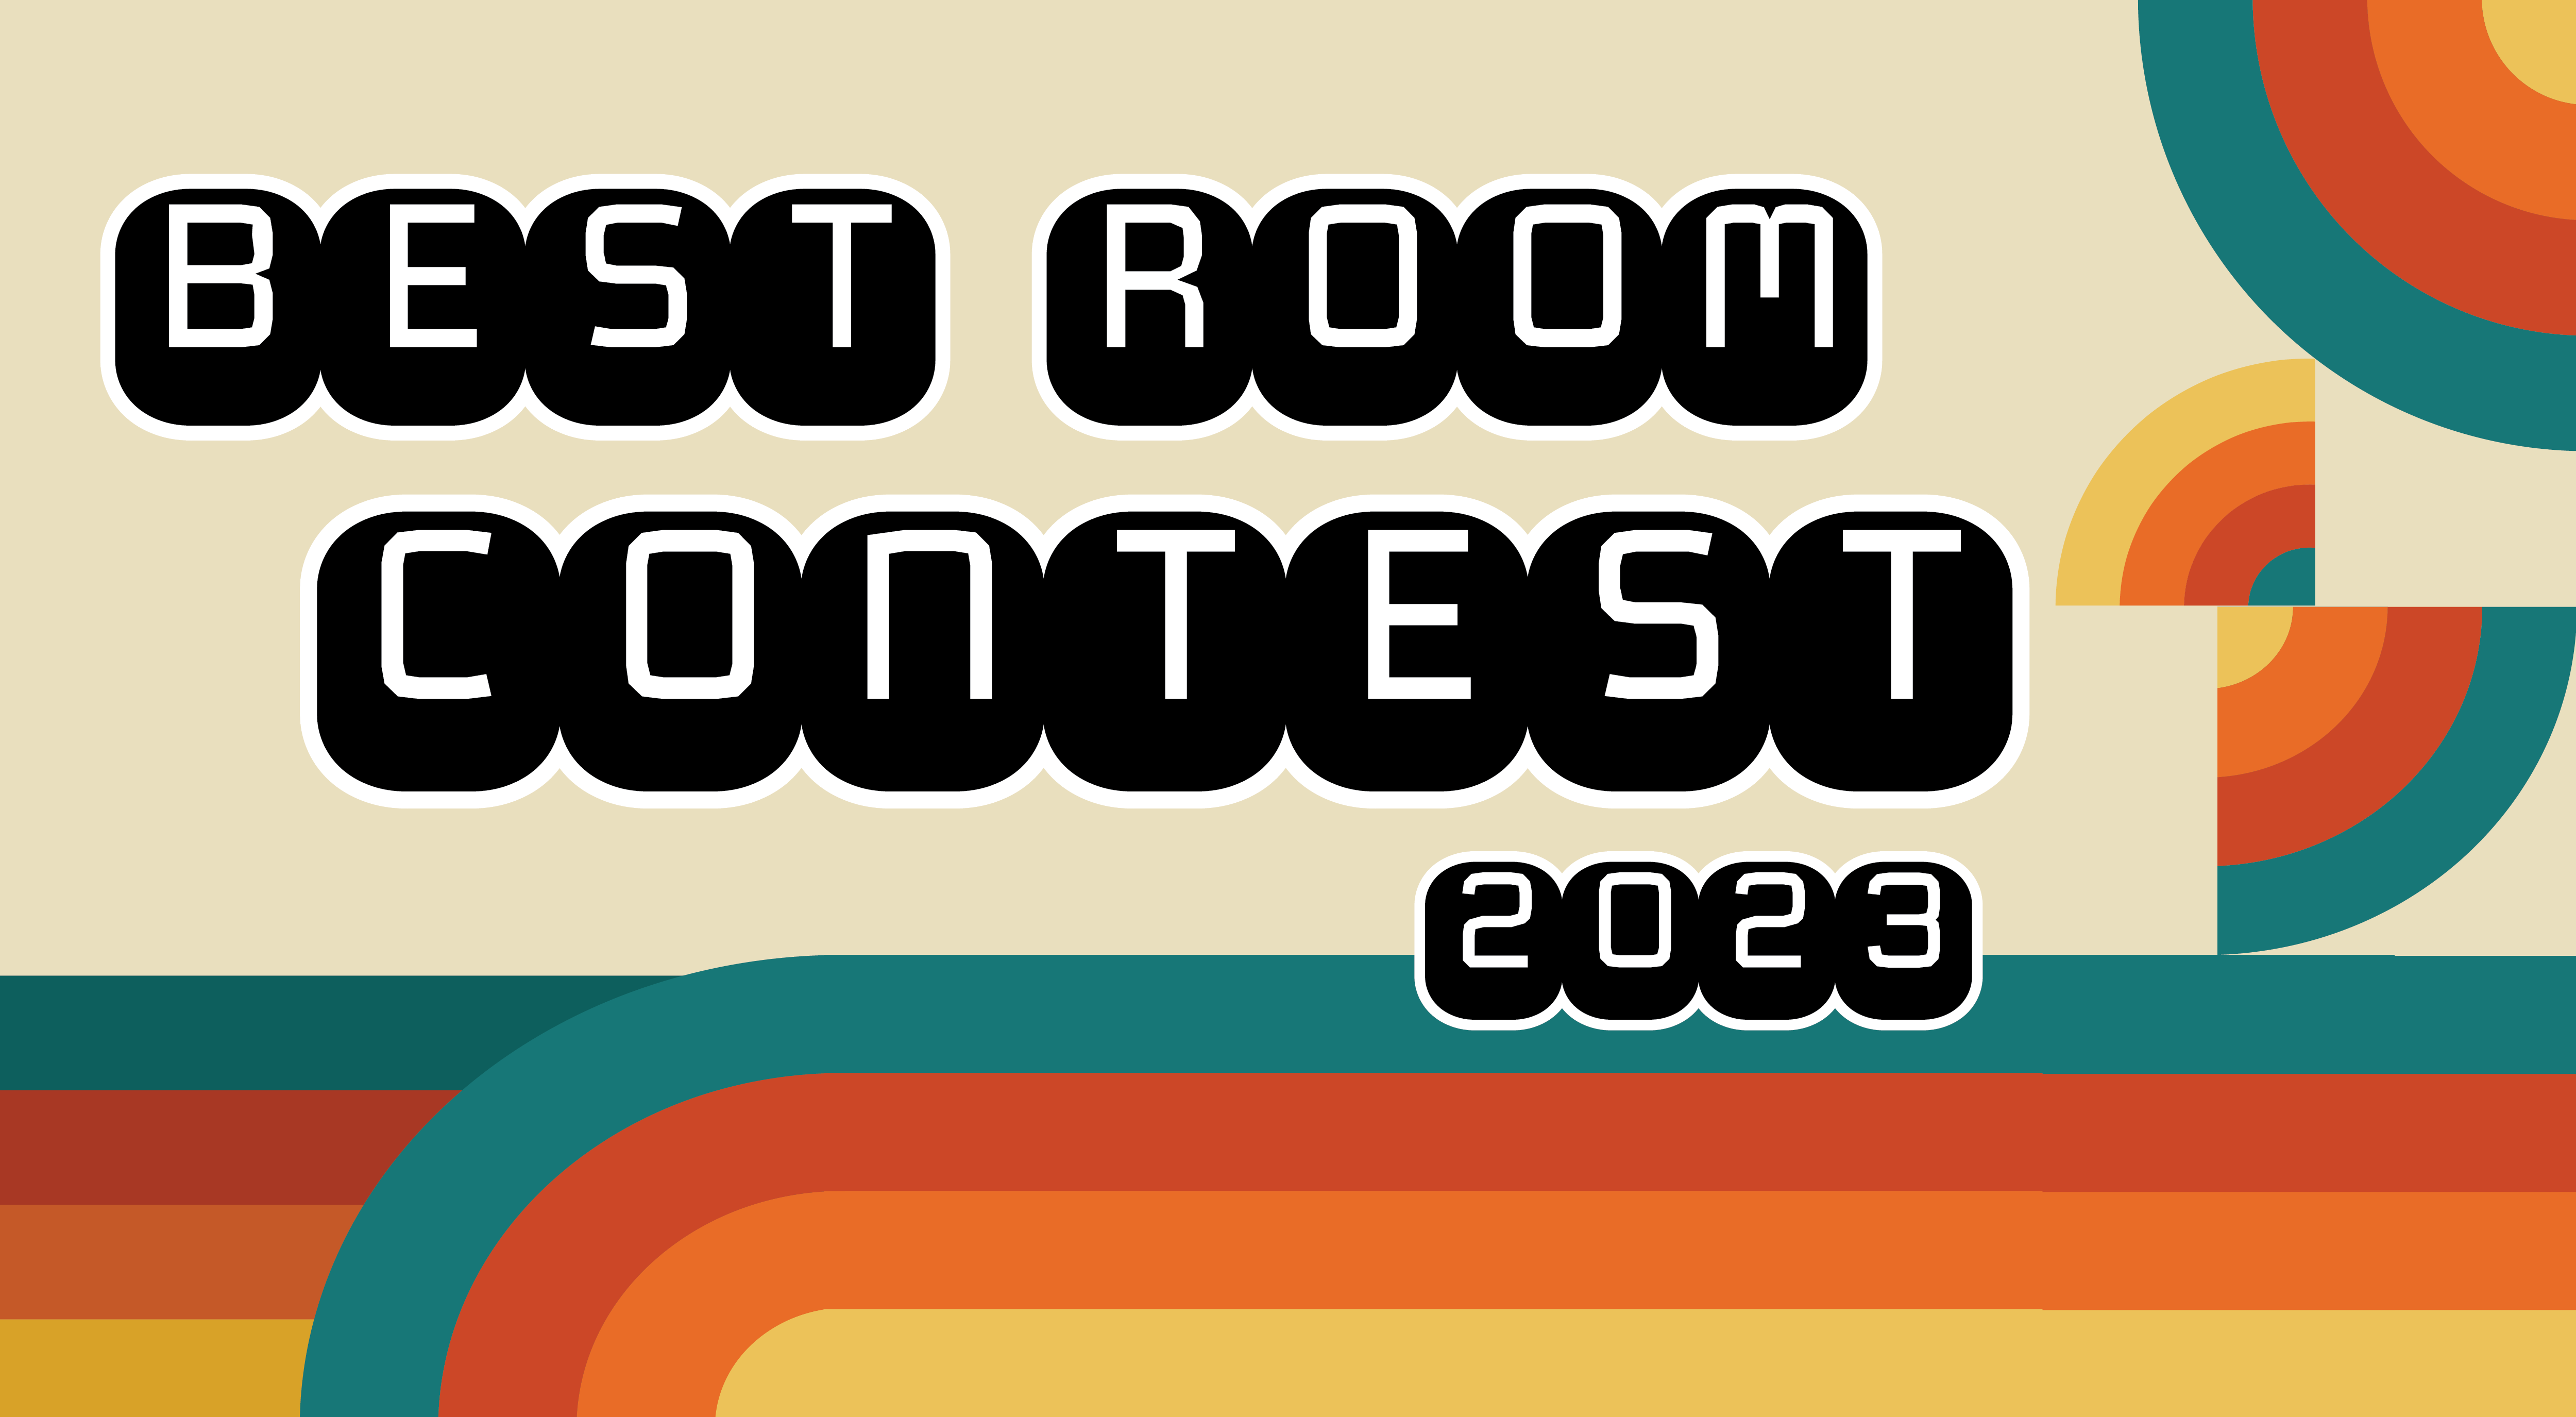 "Best Room Contest 2023" text over a 70s-inspired colorful graphic background